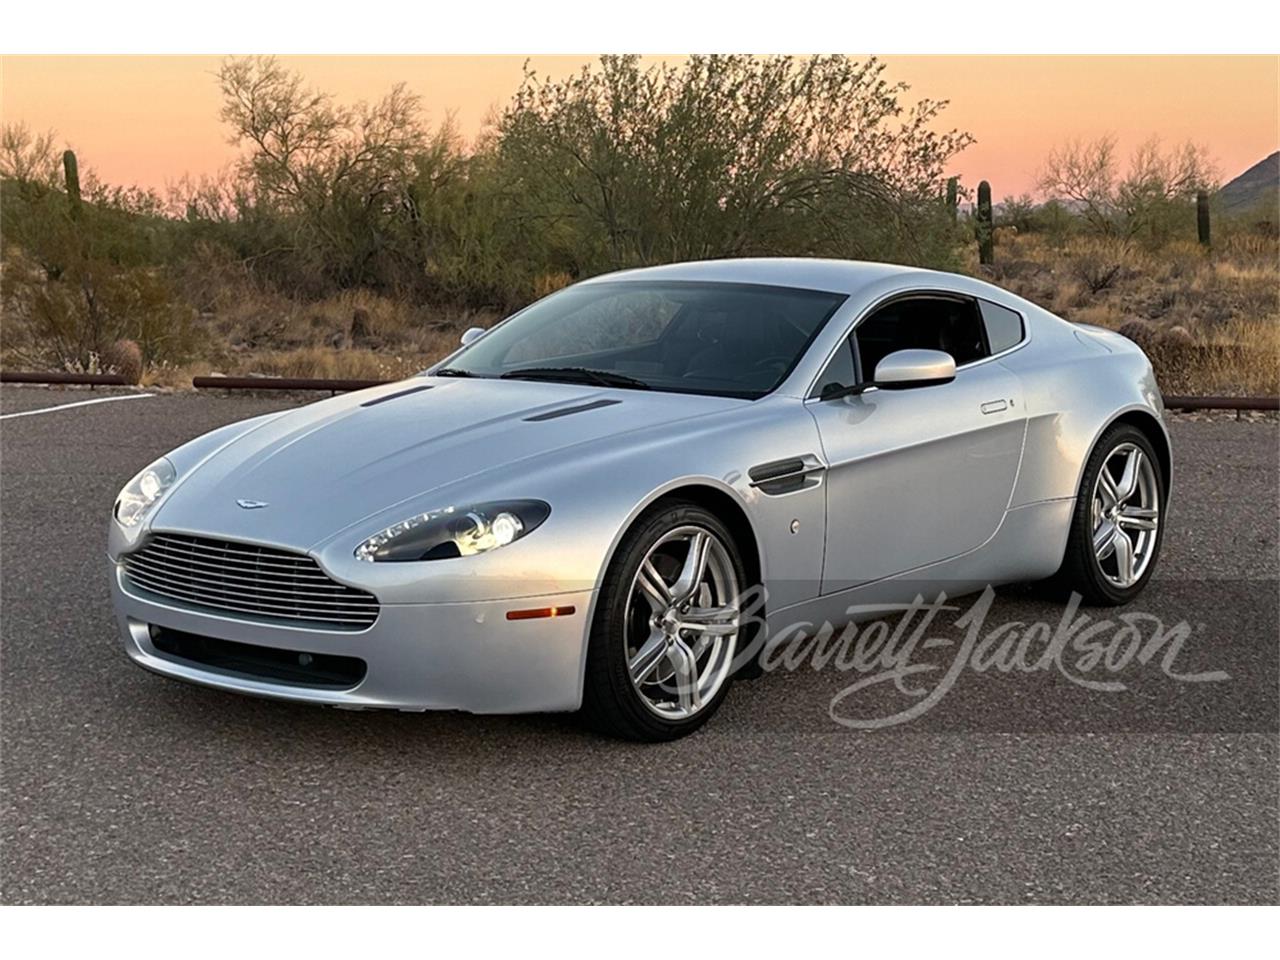 For Sale at Auction: 2009 Aston Martin Vantage in Scottsdale, Arizona for sale in Scottsdale, AZ